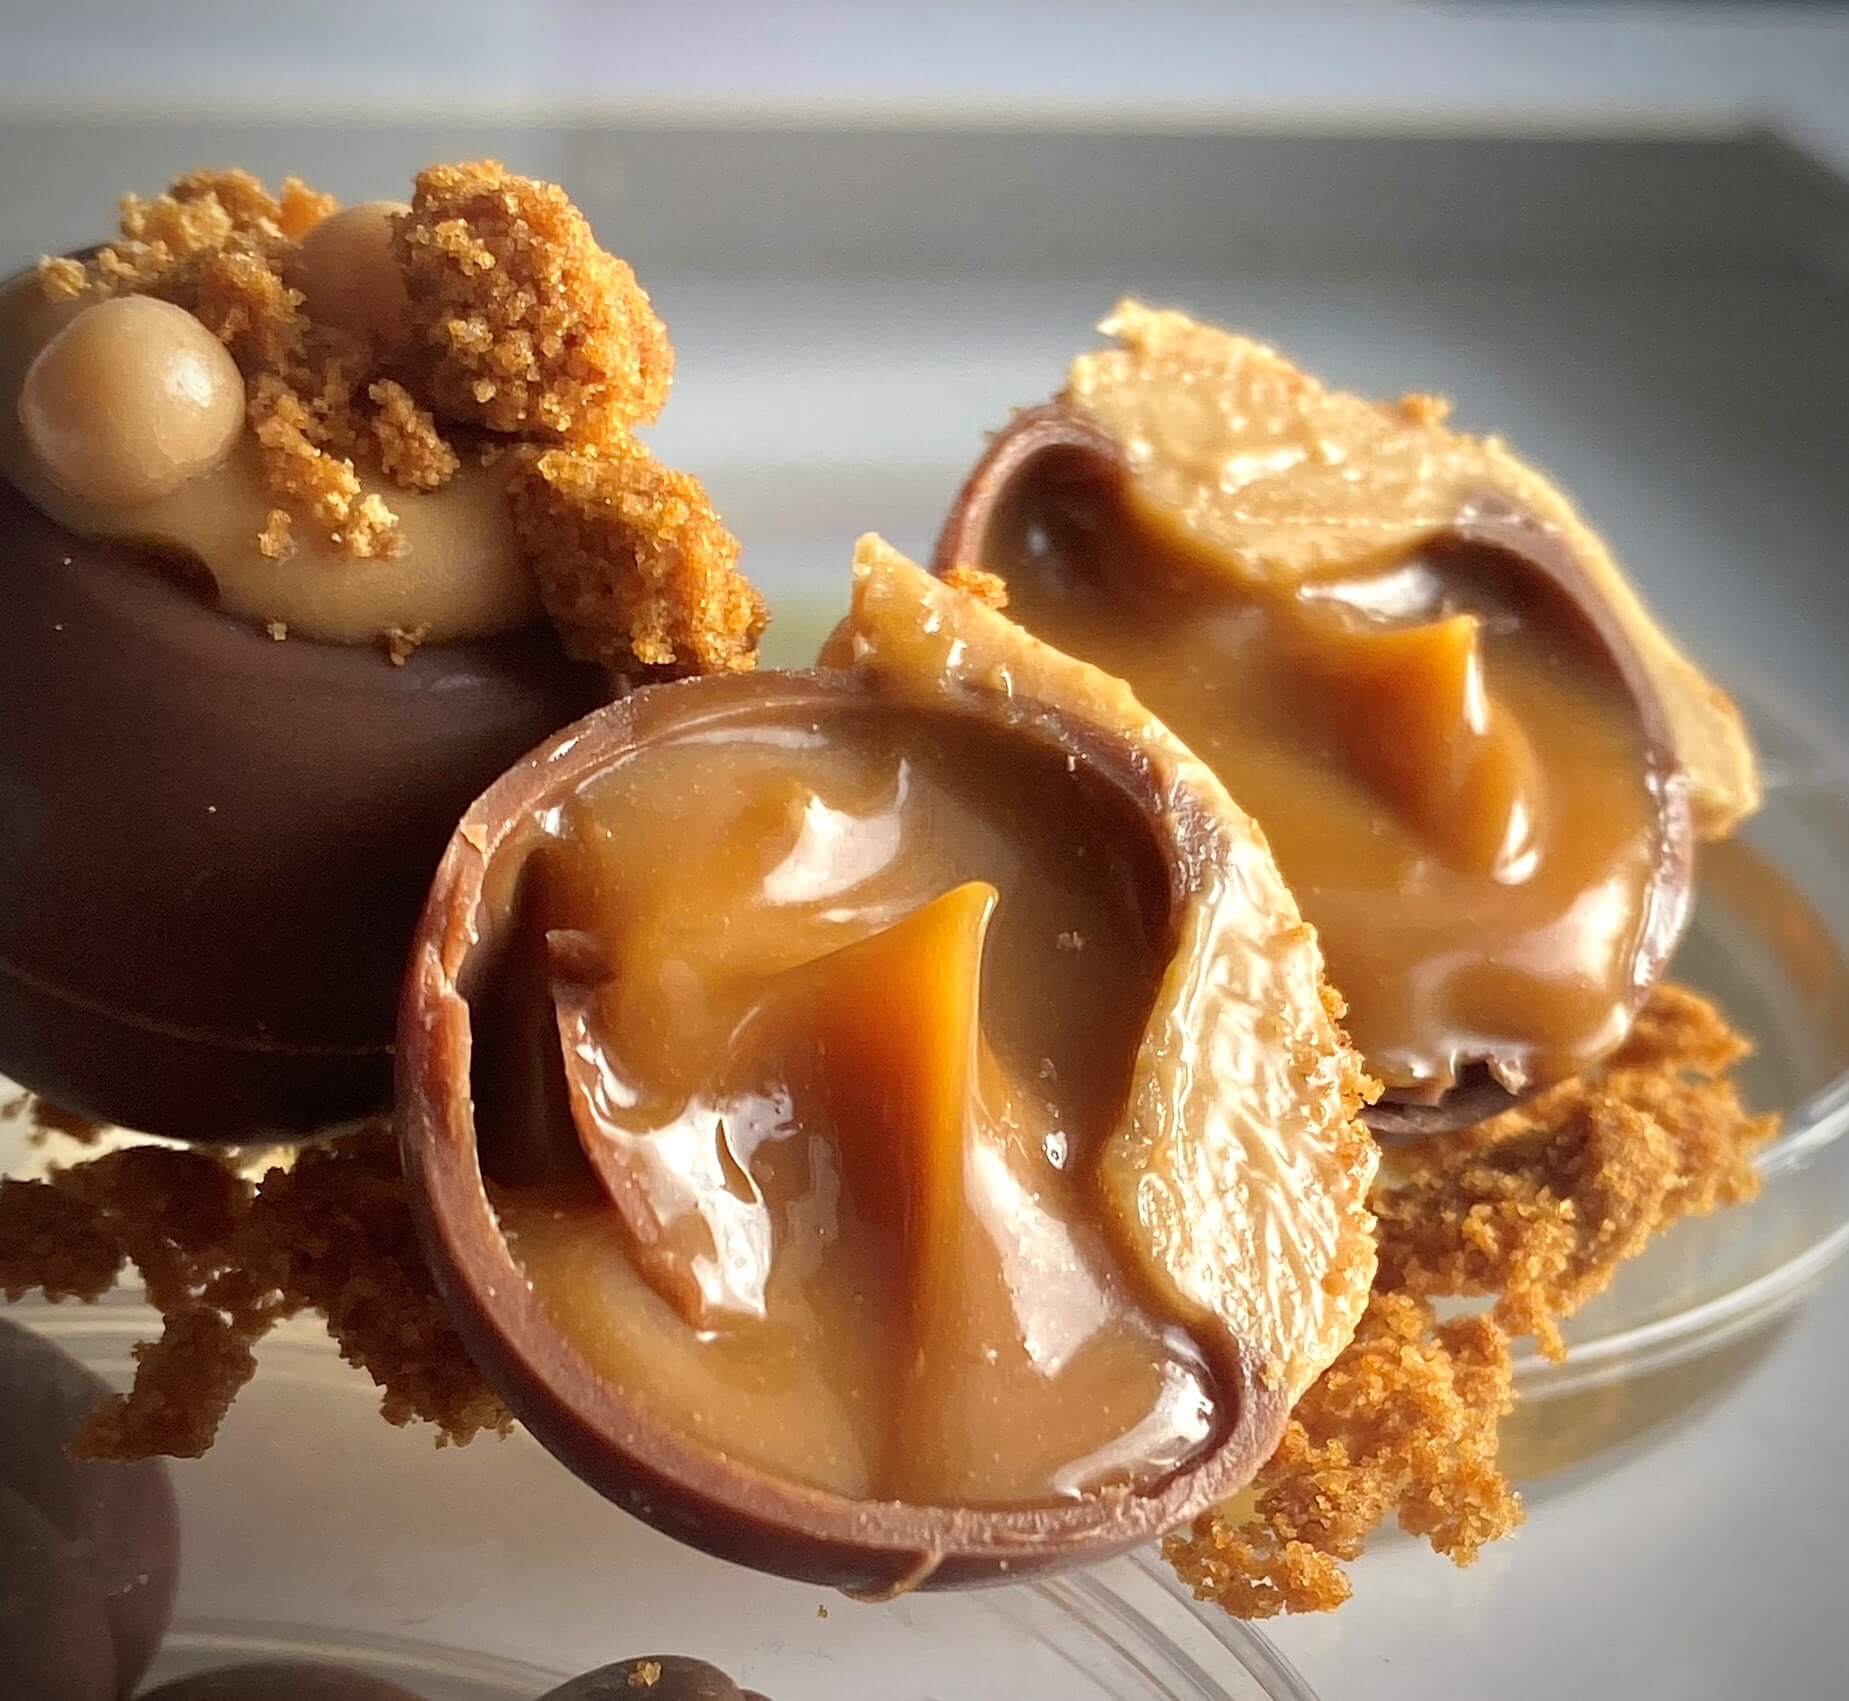 Caramel oozes out of a pile of freshly crafted chocolates.